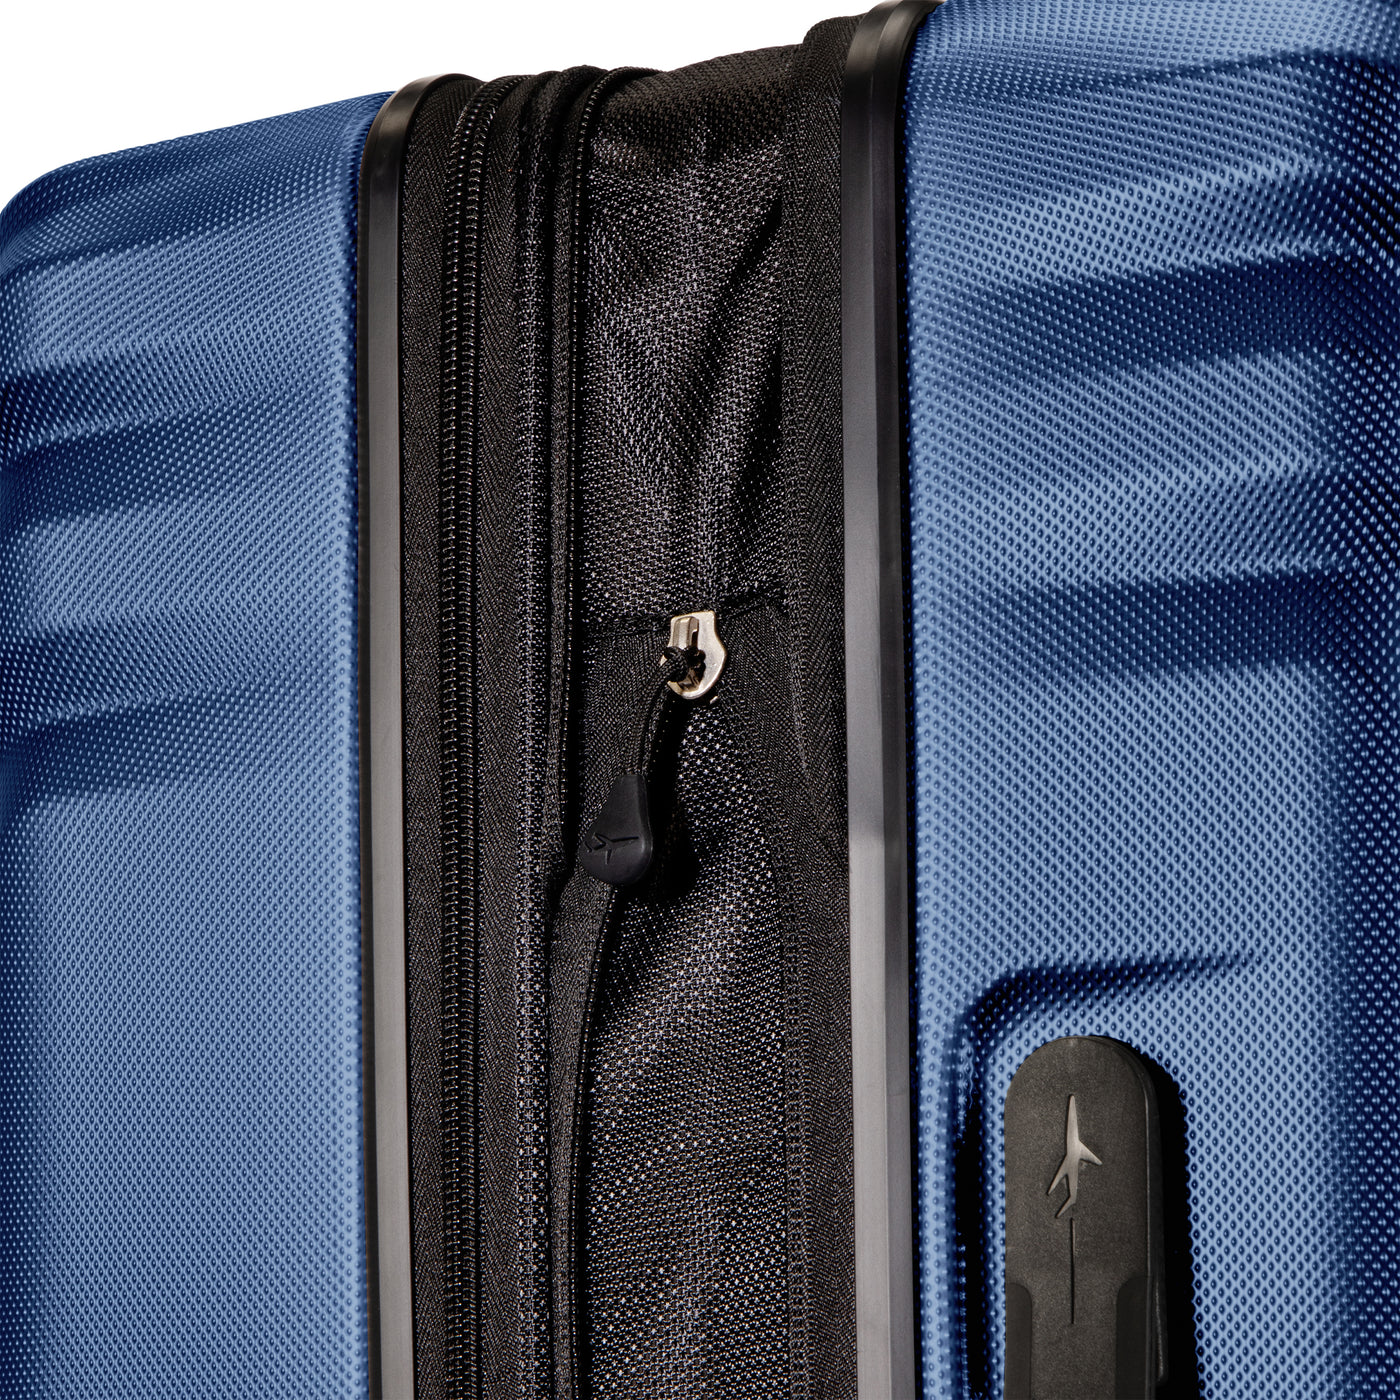 Nimbus 4.0 Medium Check-In Expandable Spinner – Skyway Luggage